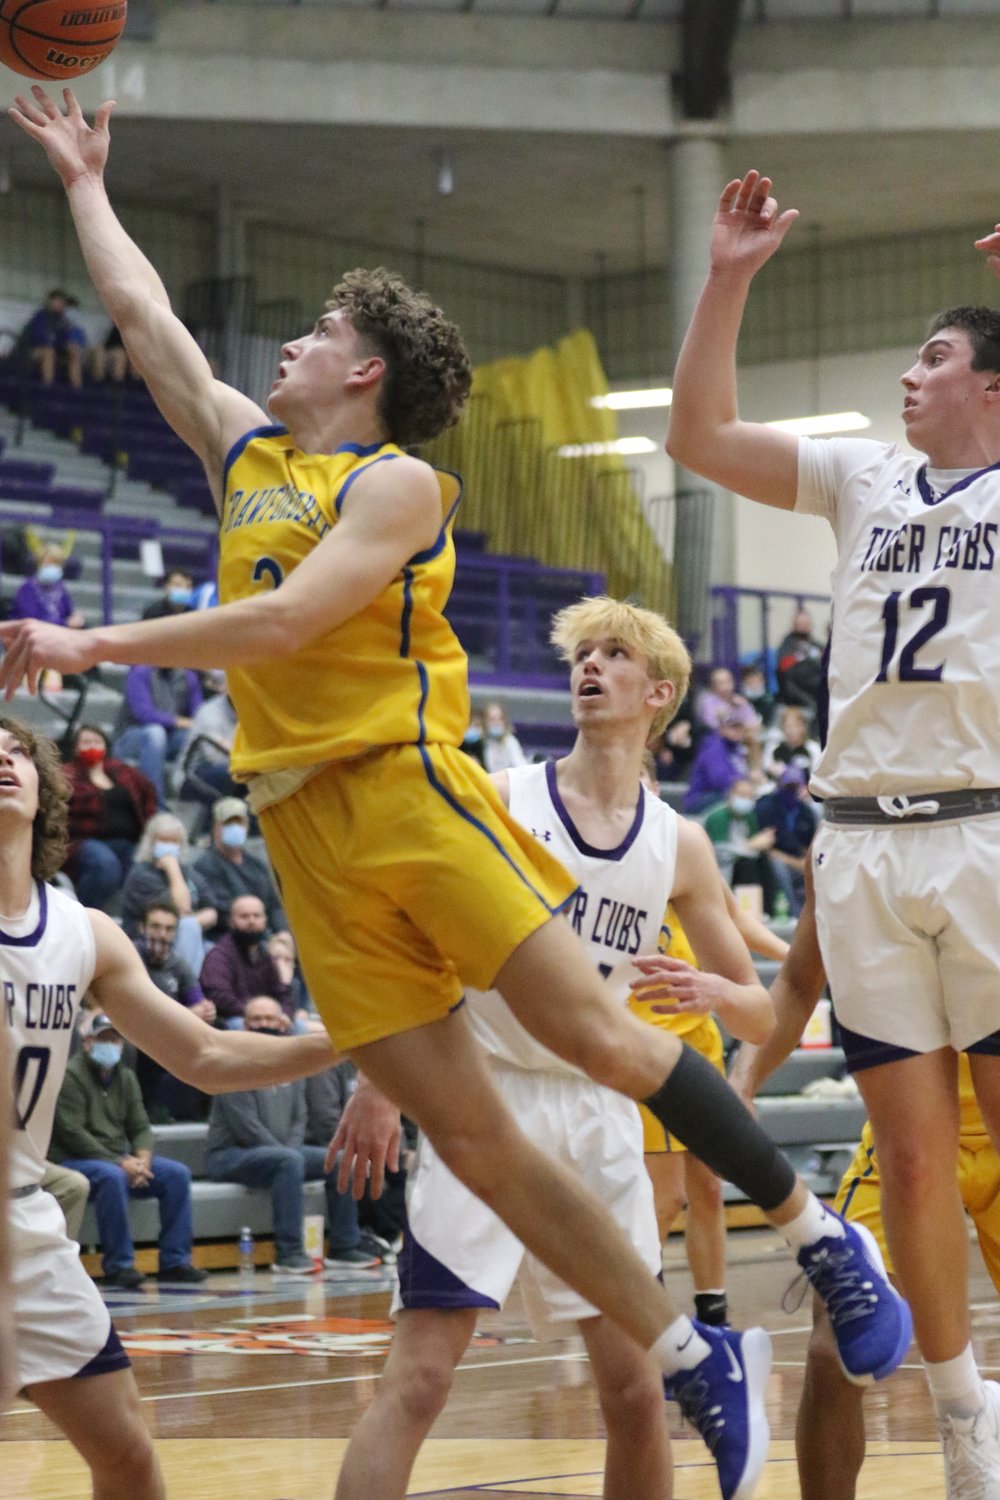 Crawfordsville’s Ty Lynas led the Athenians with 21 points in a season-opening win over Greencastle on Tuesday.